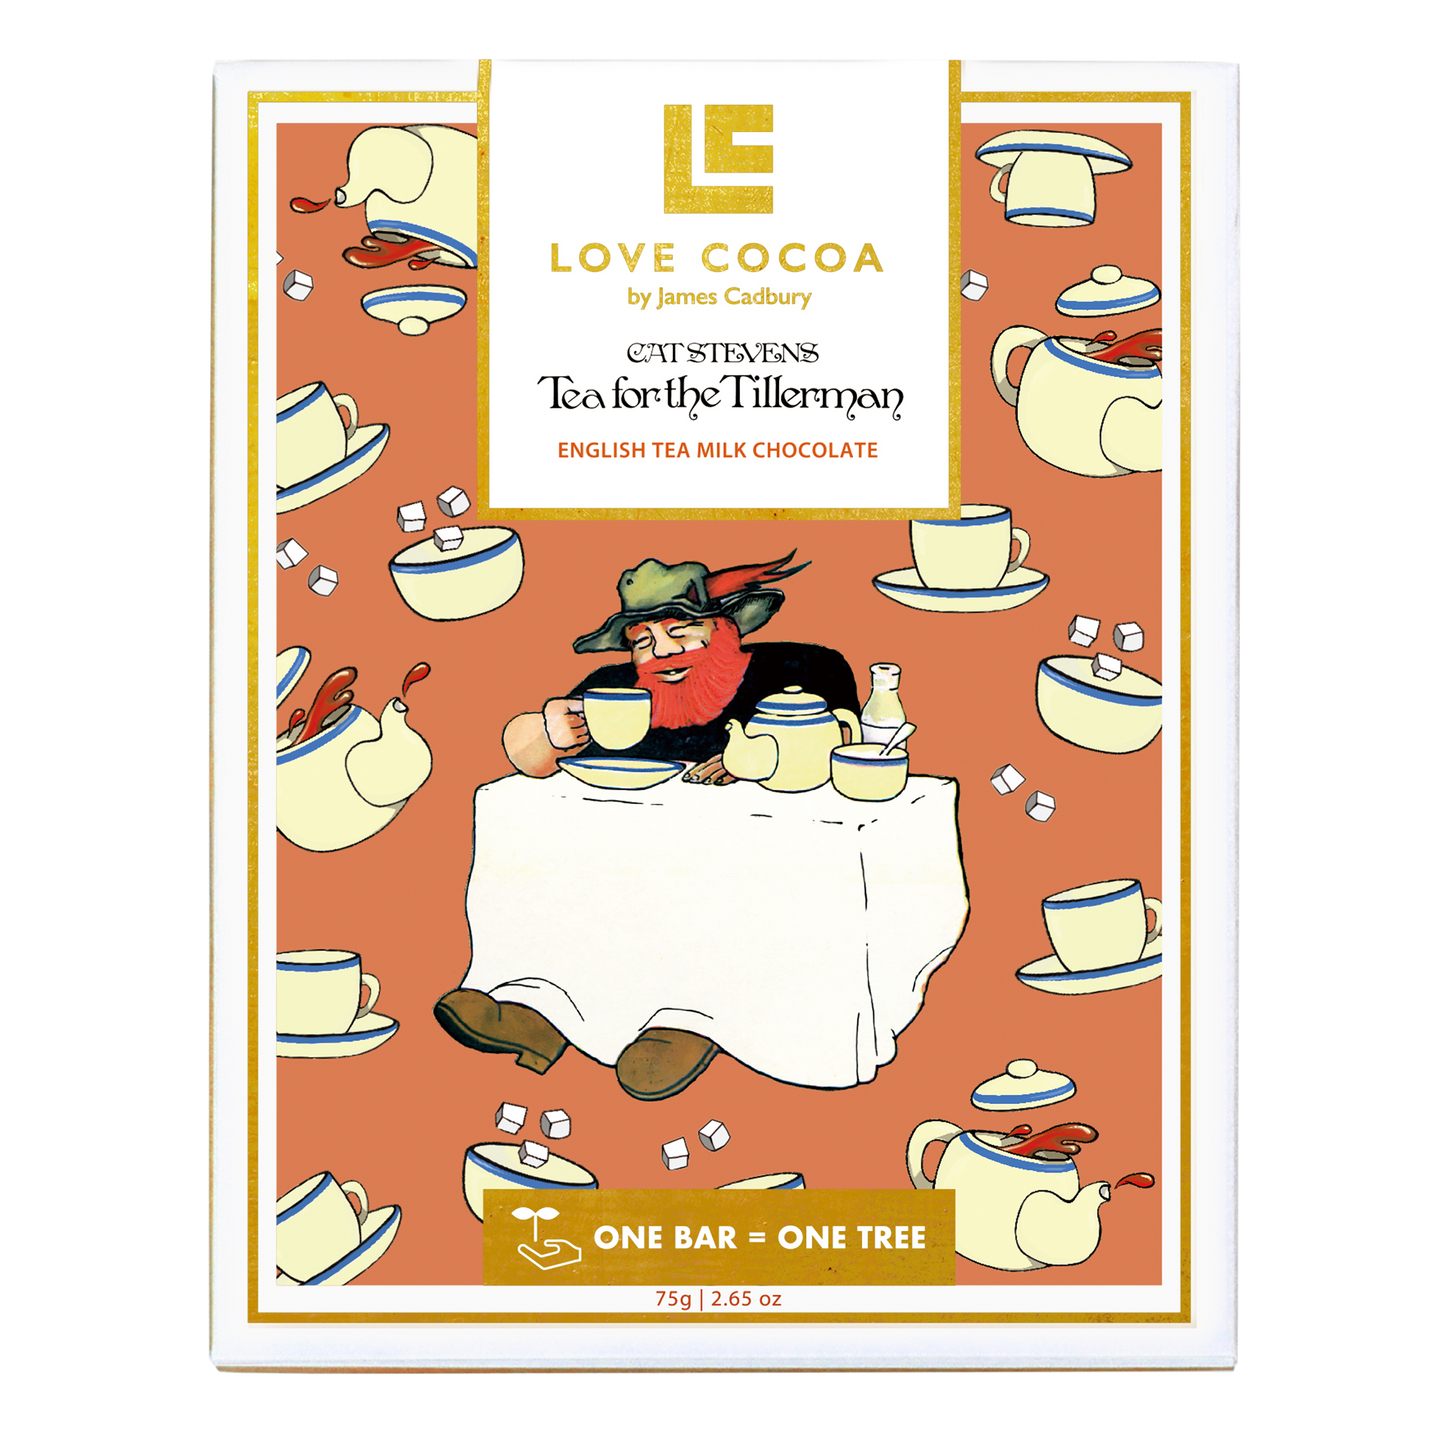 Limited Edition Tea For the Tillerman 2 Chocolate By Love Cocoa